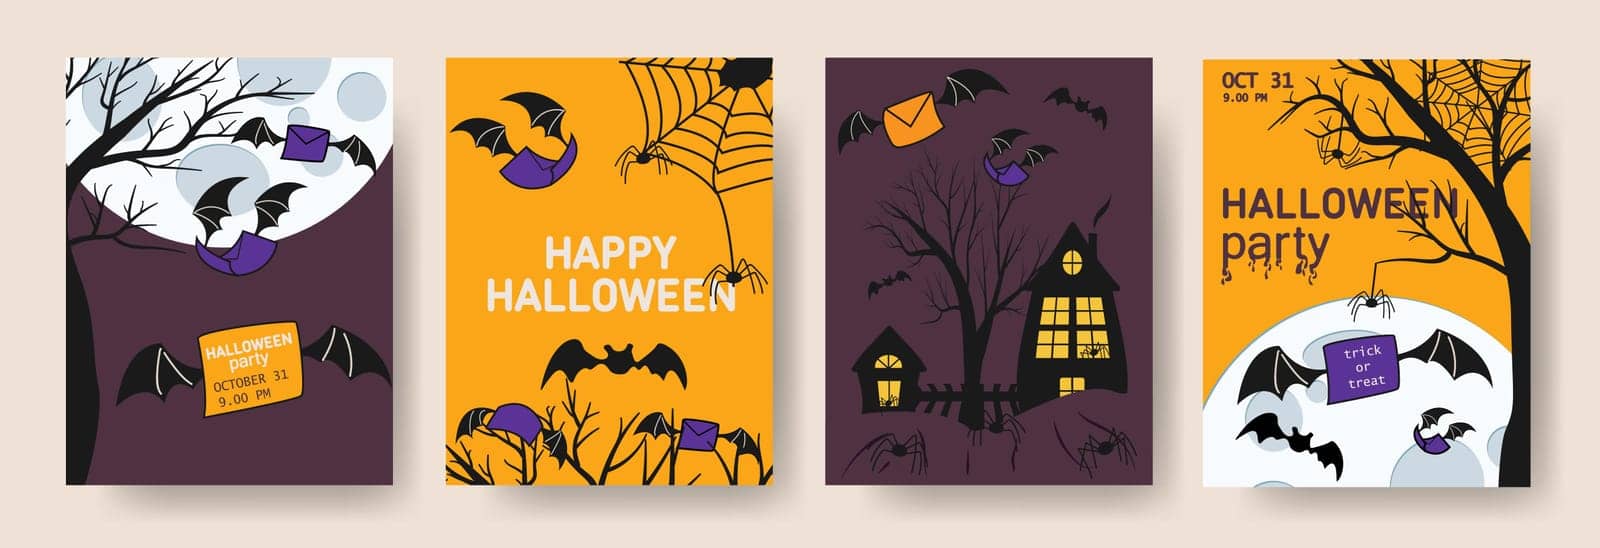 Happy Halloween party posters set with night trees and bats in flat style. Full moon, spiders web and flying envelopes. Vector brochure background